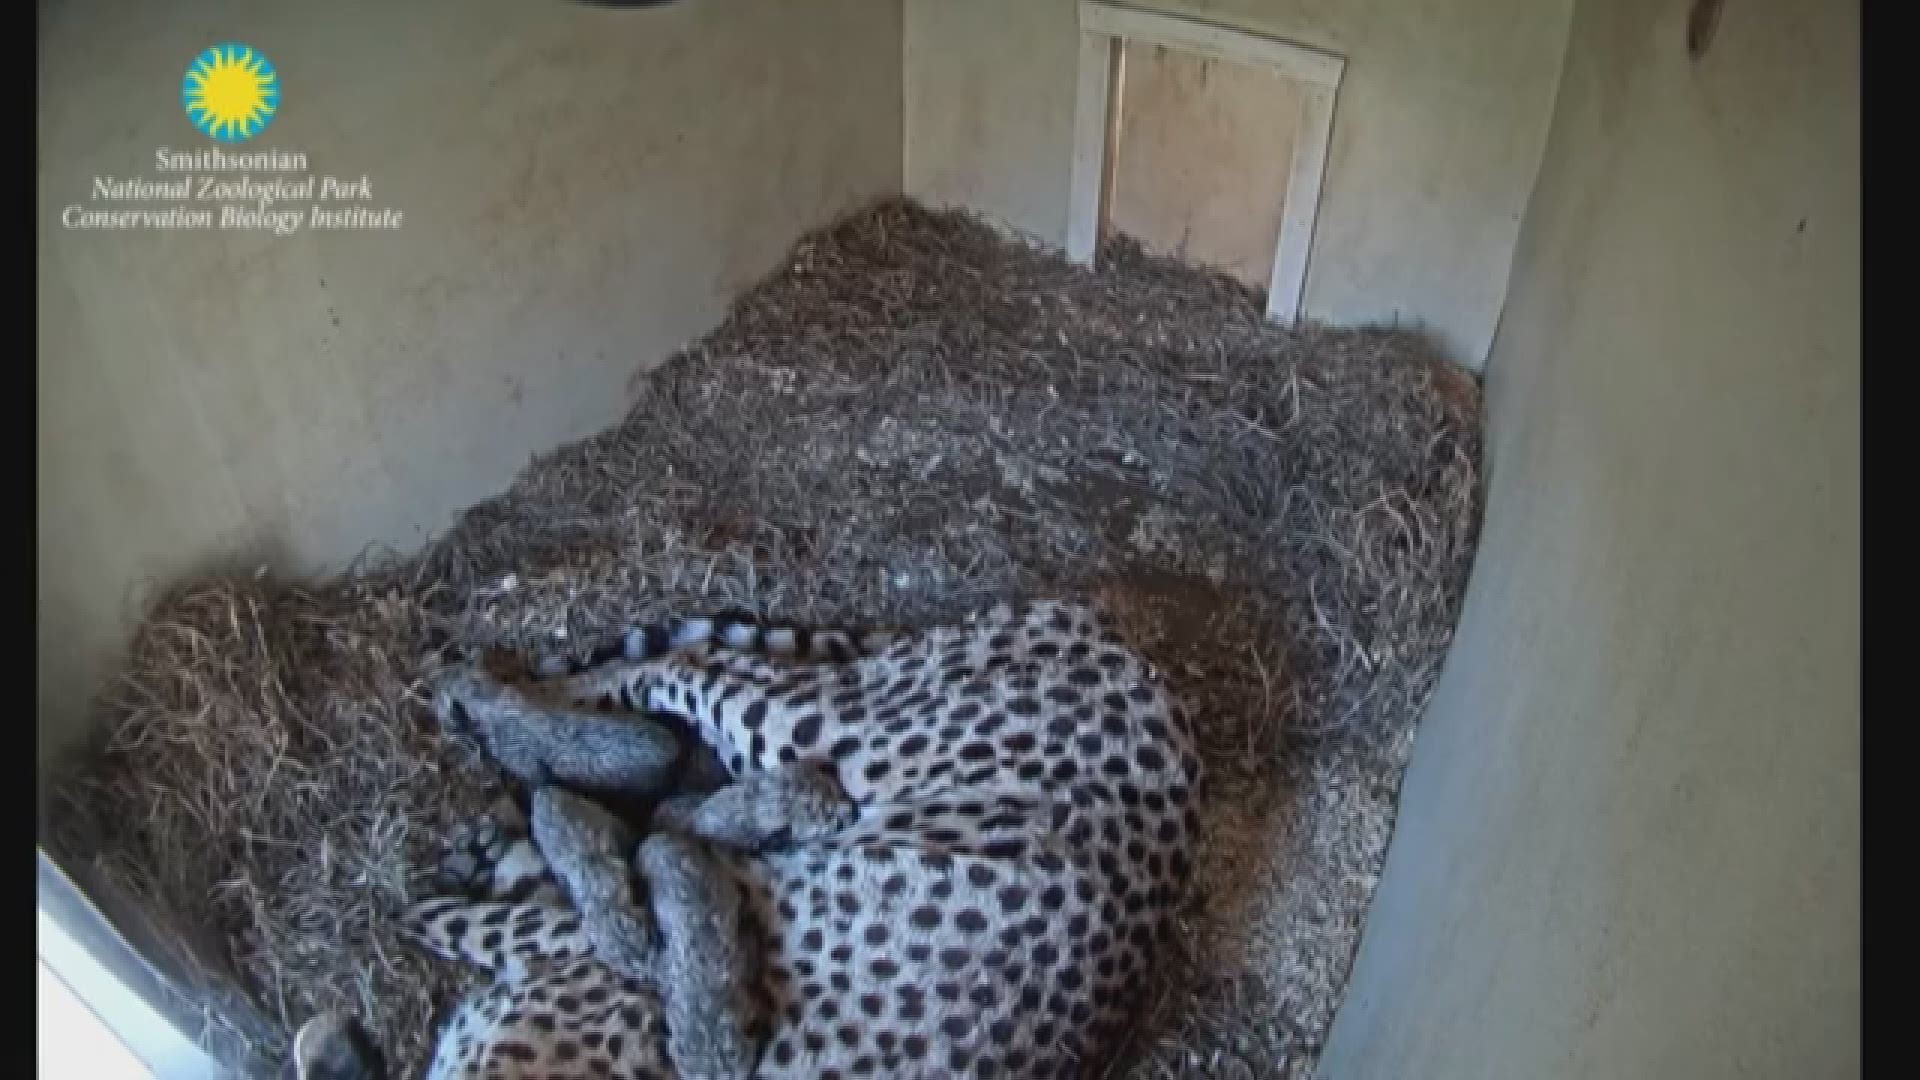 Tune in to the cheetah cub cam to watch the babies in their first few days of life.